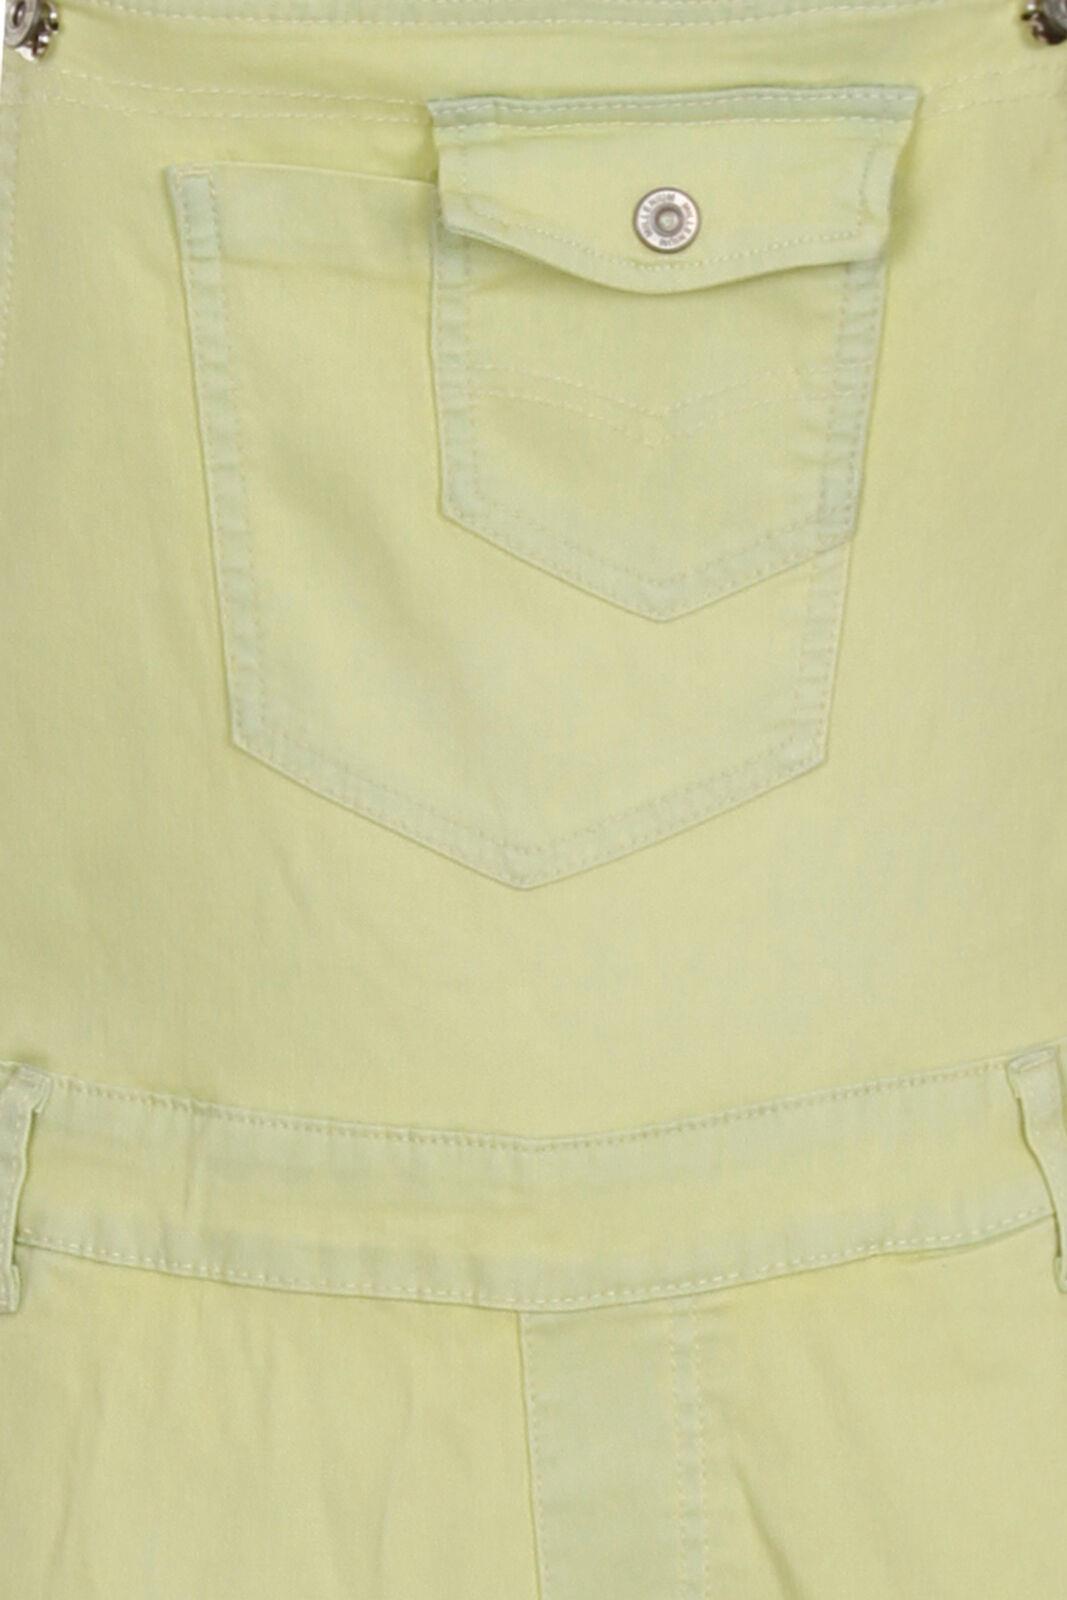 Close-up view of the bib pockets on the pale yellow skinny womens dungarees.